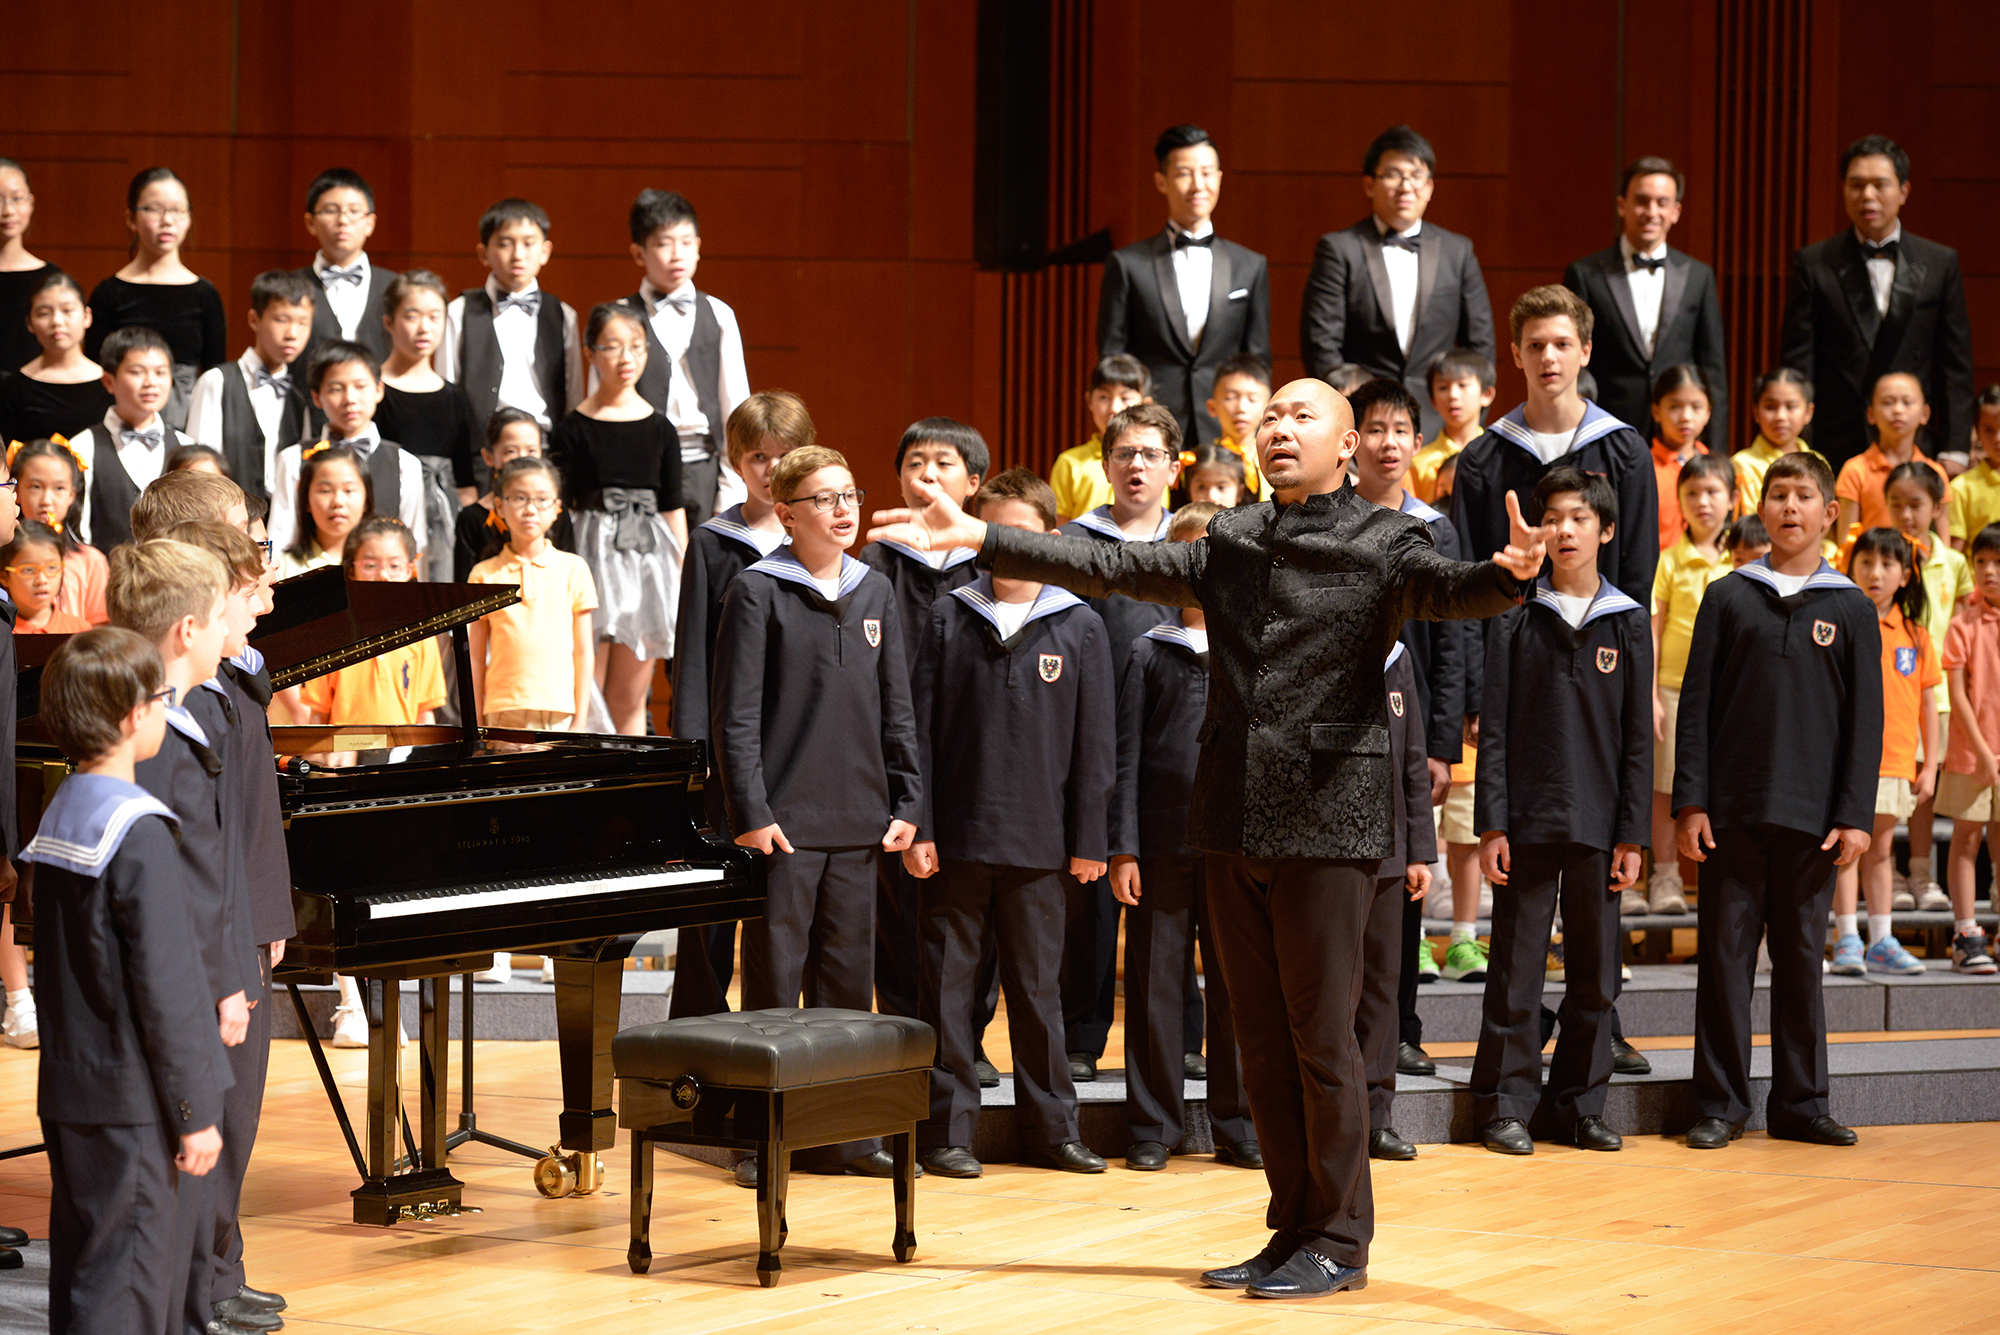 Special guest performance by the Vienna Boys Choir led by the famous choirmaster, Mr. Jimmy Chiang.